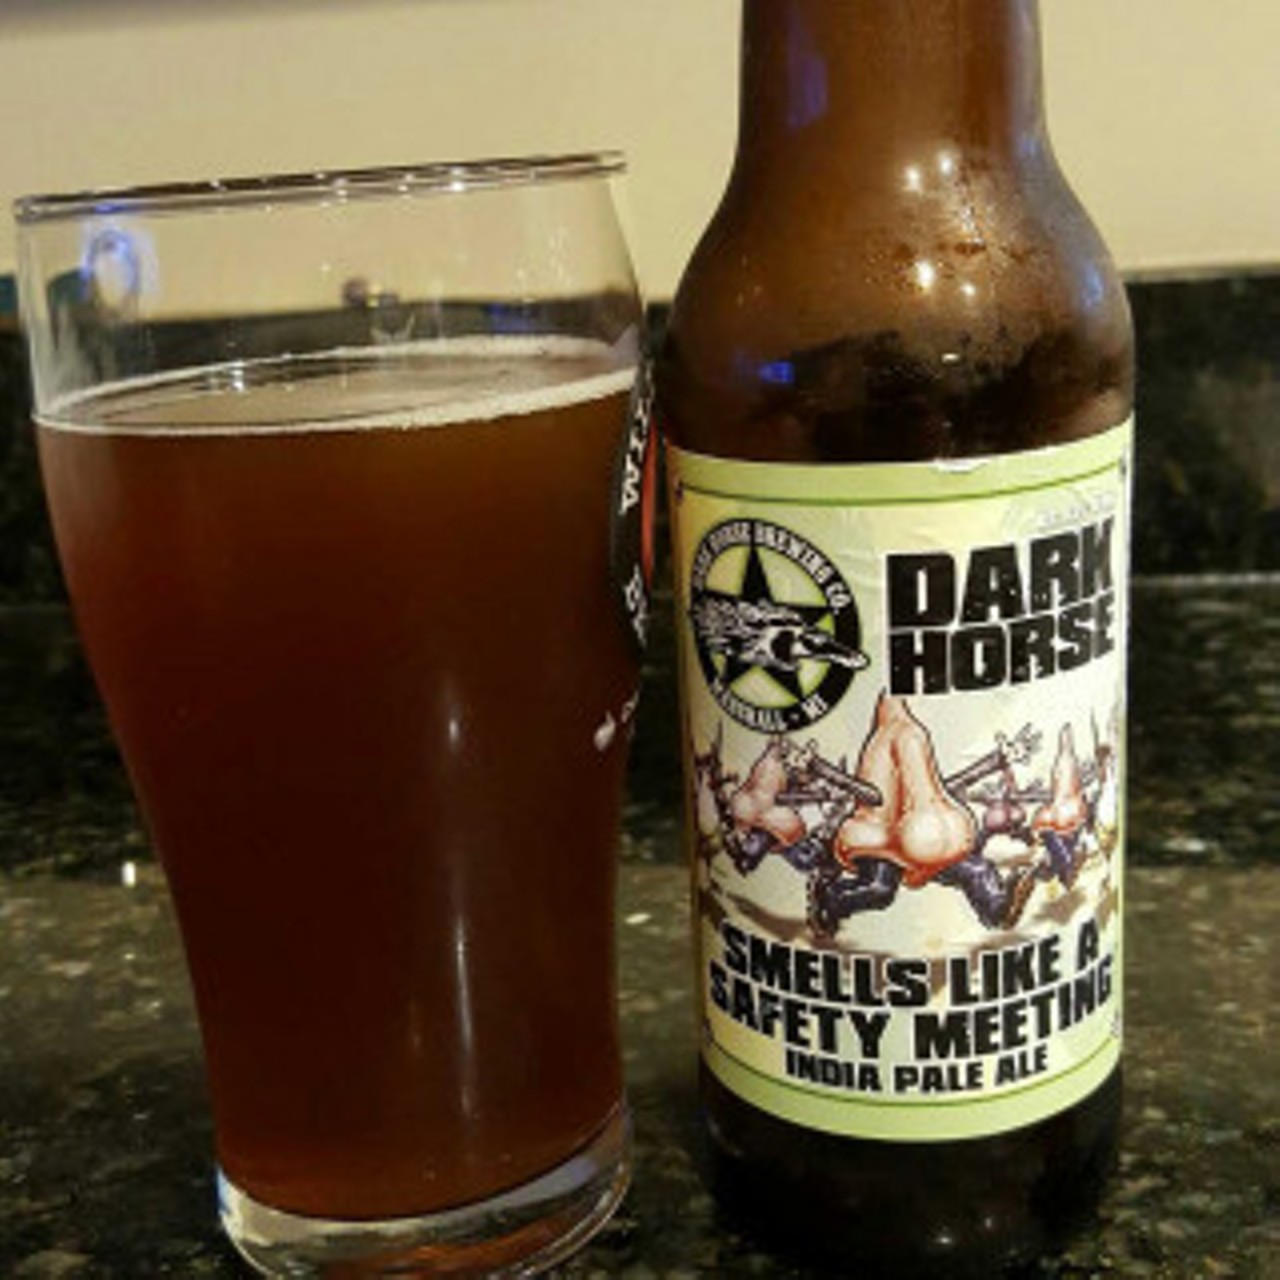 Smells Like a Safety Meeting - Dark Horse Brewing Co 
ABV: 8.5% 
Other than having the best name for a beer ever, Smells Like a Safety Meeting is an American Double/Imperial IPA that will knock you off your socks. This is a very aromatic beer, loaded with a ton of hops that Dark Horse Brewing Co. describes as "dank." If you are a fan of hops, then you won't want to pass up this brew.